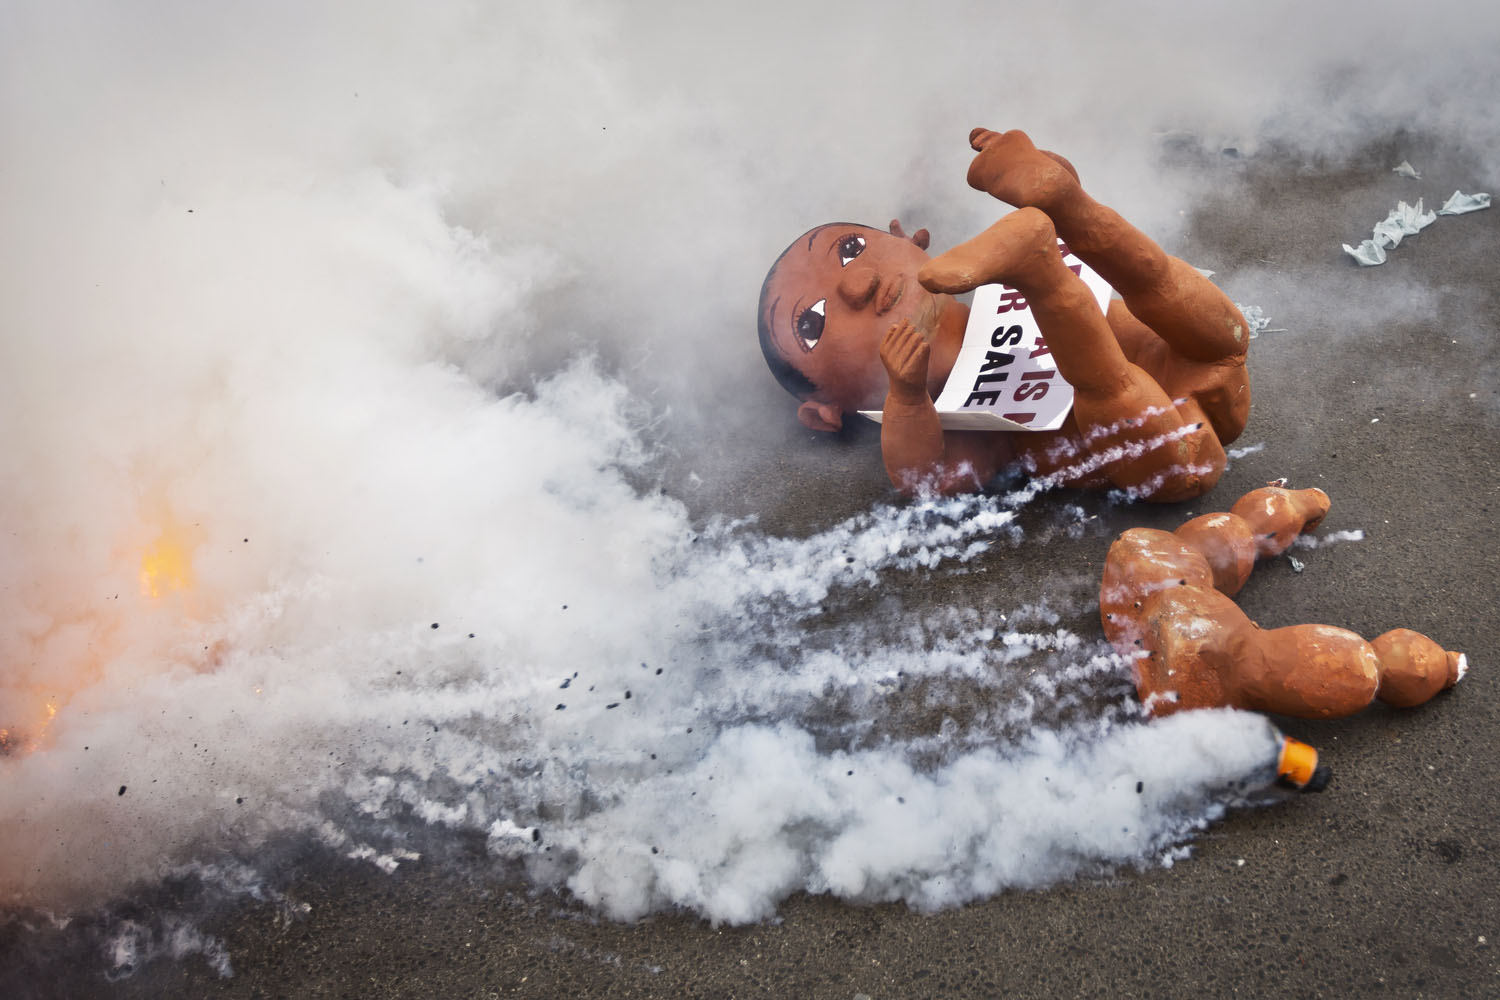 Feb. 13, 2014. A giant mock baby used by anti-government protesters to represent what they claimed was the  childish  apathy of the Kenyan people and the need for the country to  grow up , lies abandoned on the street as demonstrators flee tear gas canisters fired by police exploding around them, in downtown Nairobi, Kenya.